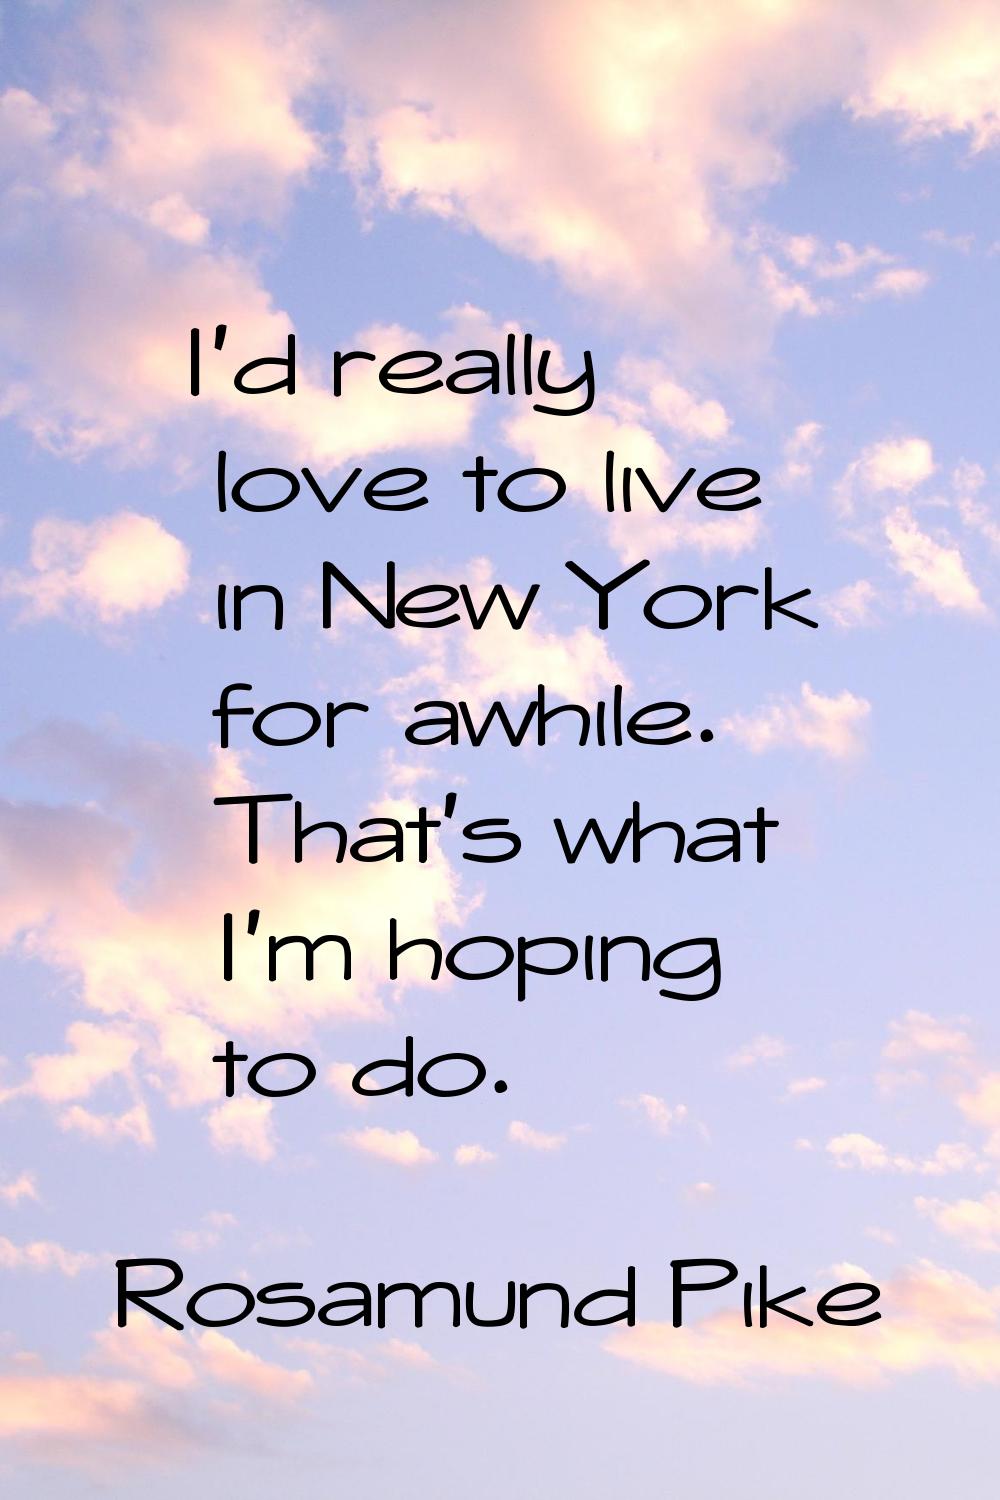 I'd really love to live in New York for awhile. That's what I'm hoping to do.